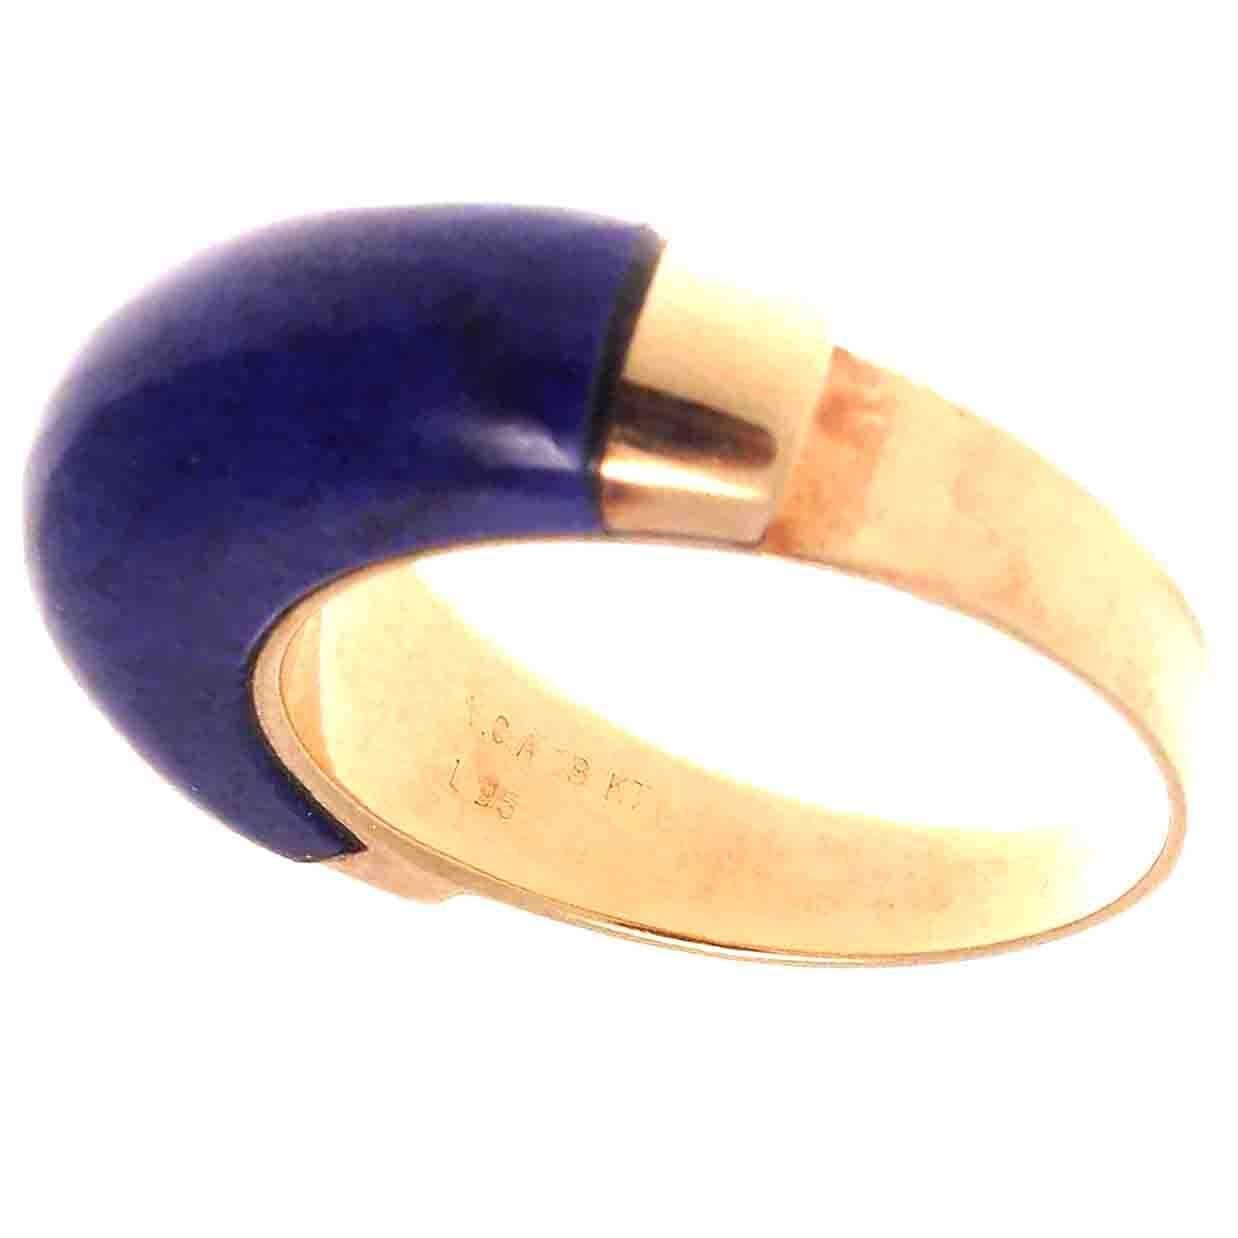 From  Van Cleef & Arpels, a spare and lovely designed ring with multi hued royal blue lapis lazuli. Hand crafted in glistening 18k yellow gold. Signed VCA, numbered and stamped with French hallmarks. Contact us if you are interested in purchasing